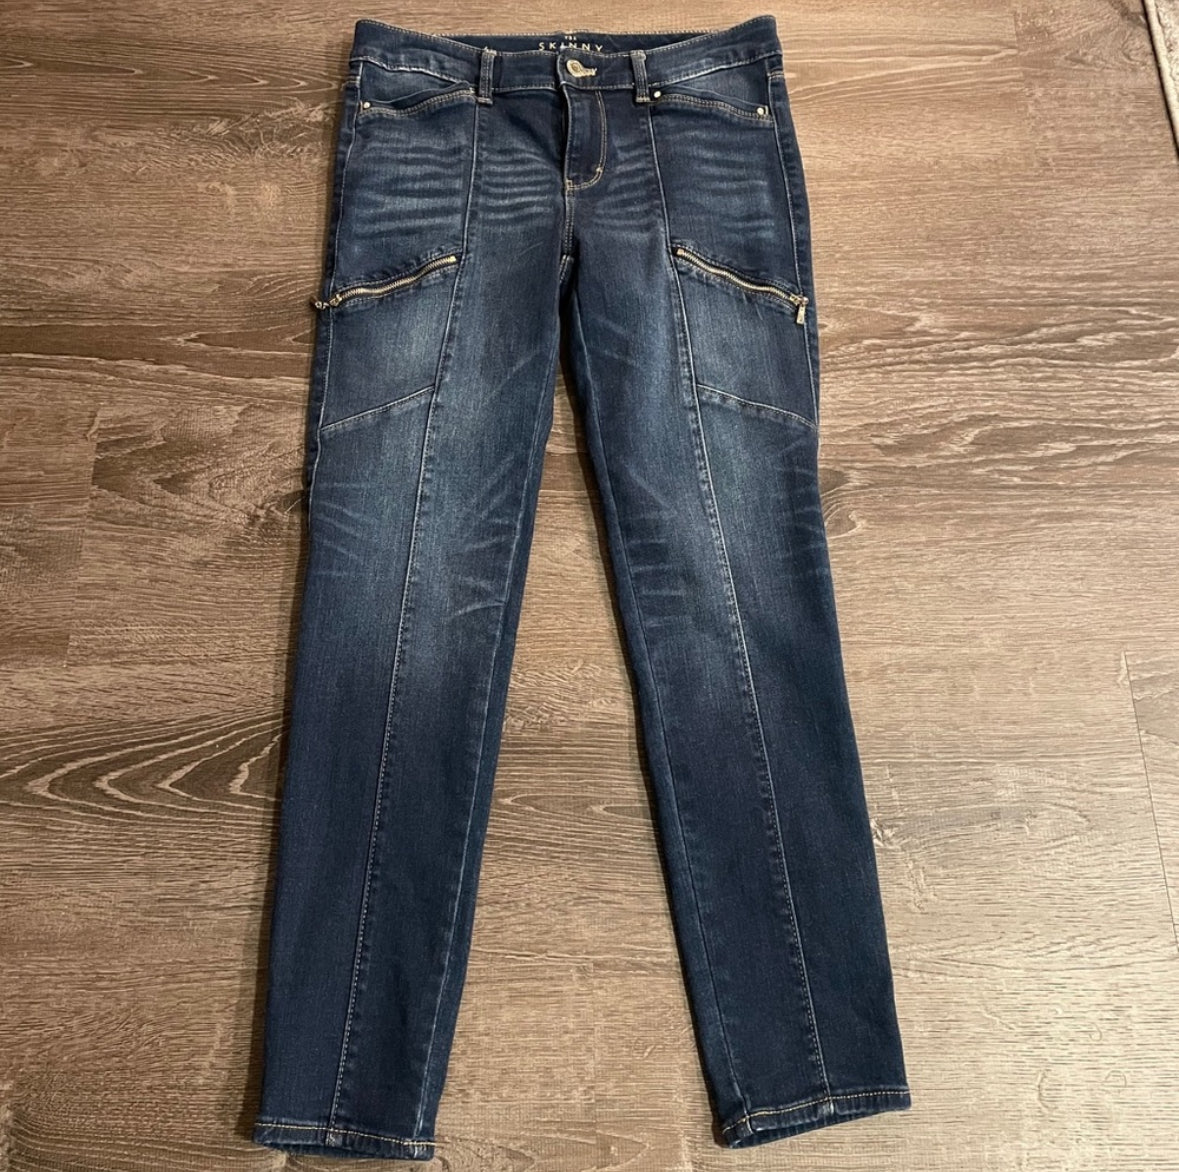 NWOT WHBM Skinny Ankle Jean | Size 4